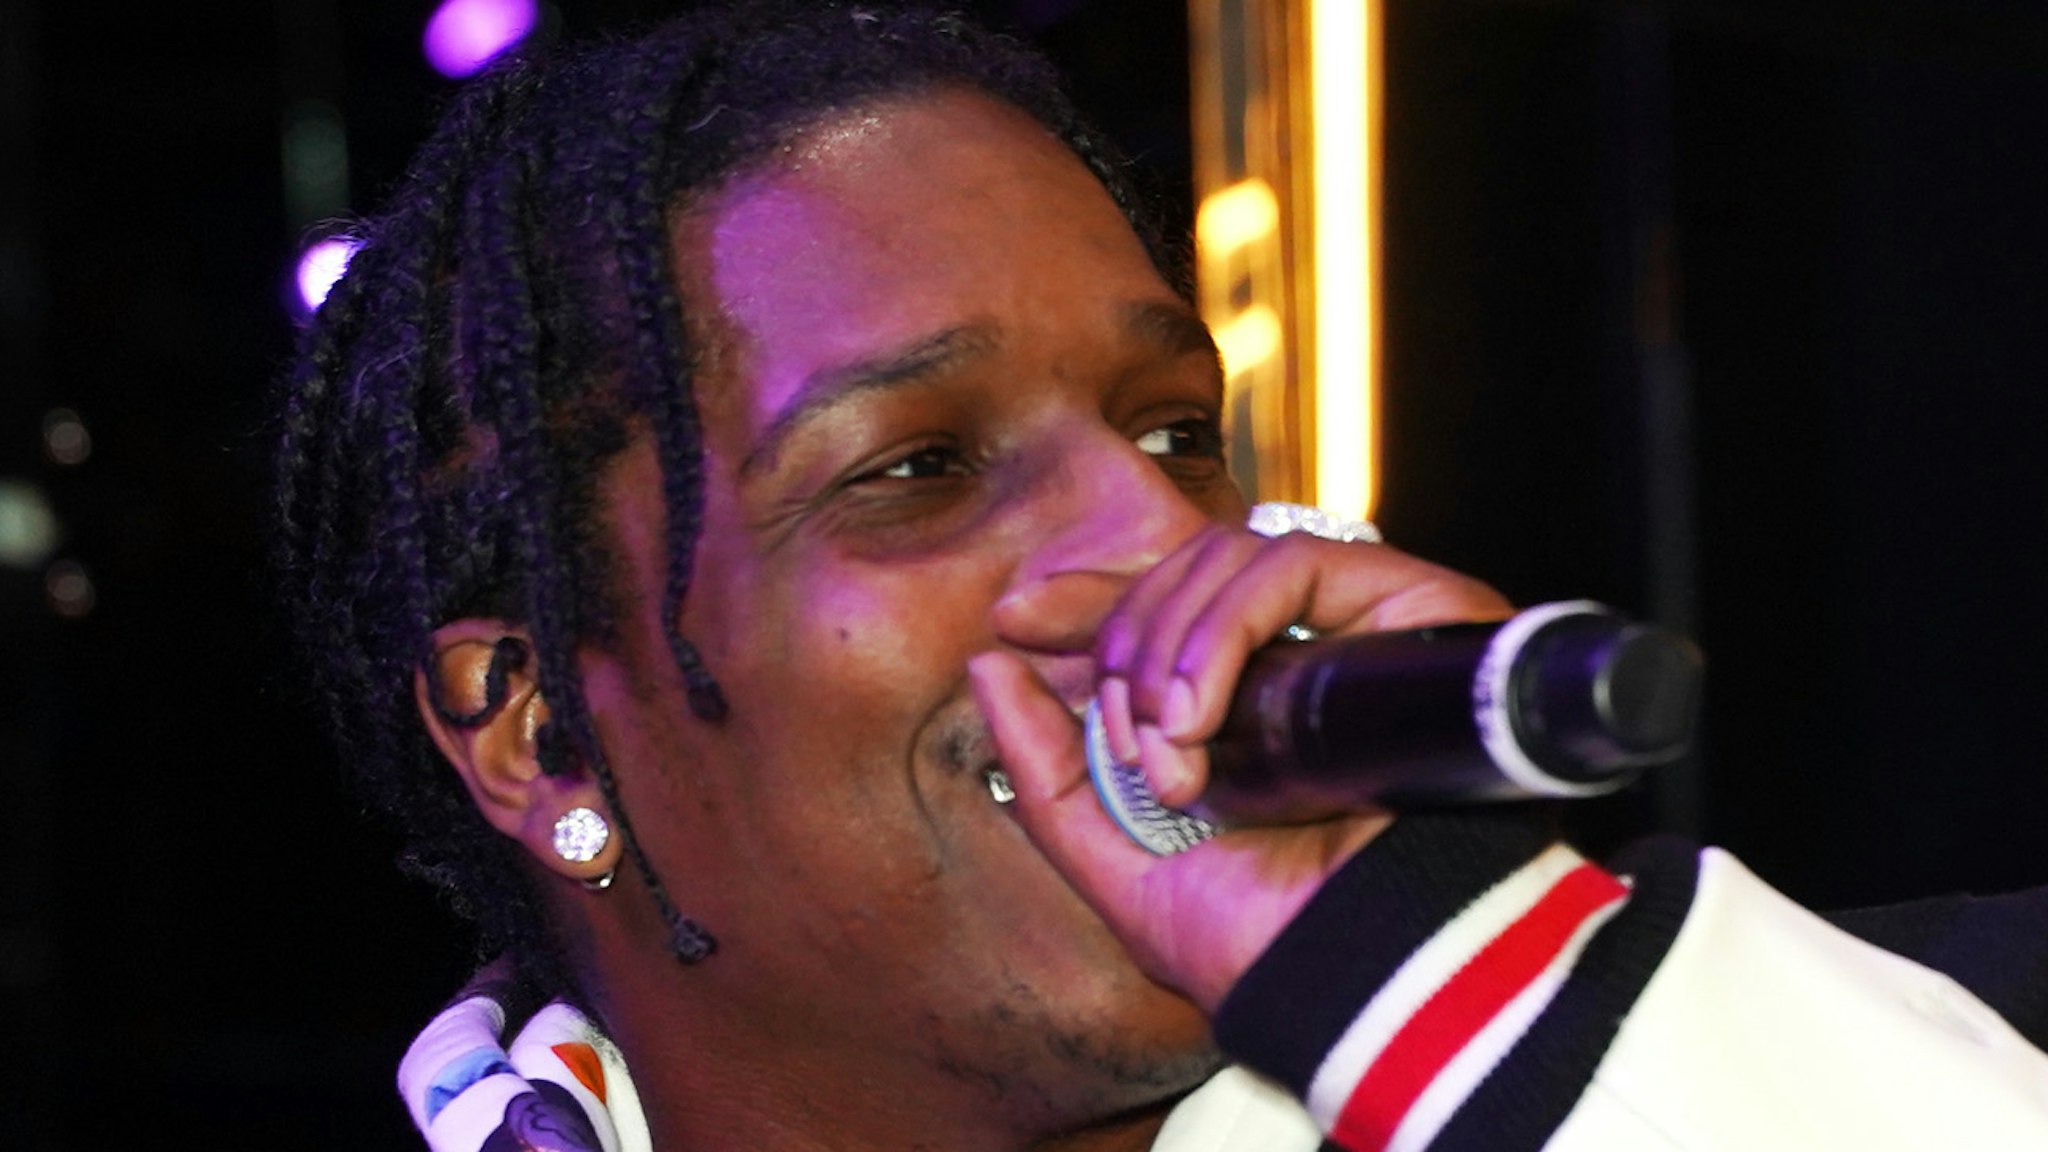 : A$AP Rocky performs onstage during the Bilt Rewards x Wells Fargo Launch Party at SUMMIT at One Vanderbilt on March 28, 2022 in New York City.